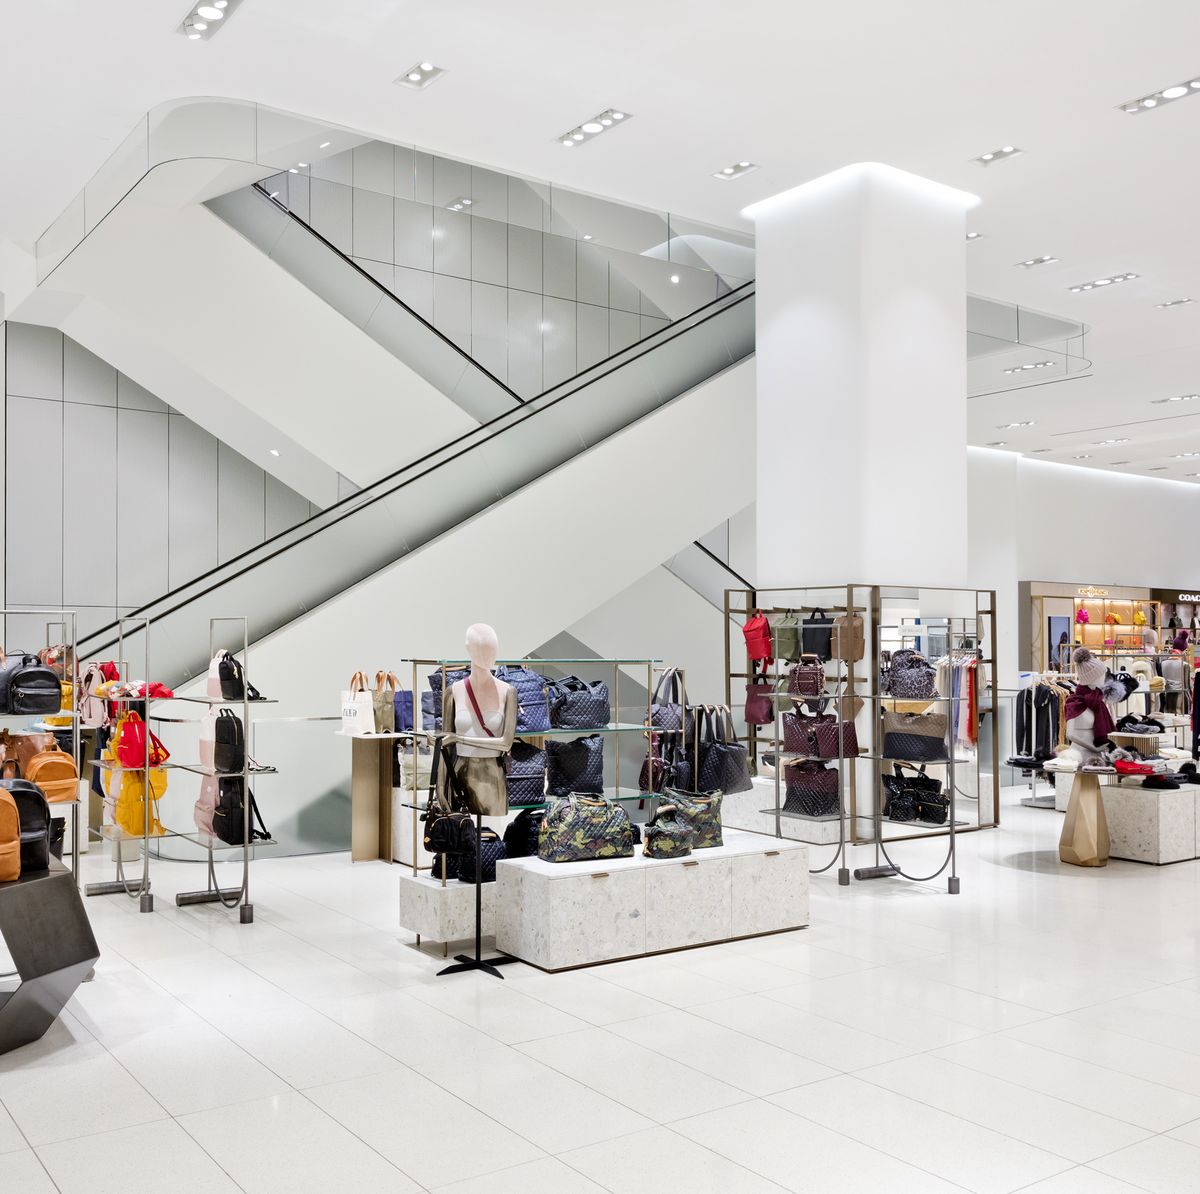 Nordstrom dedicates 2 floors to beauty at 320,000 sqft new NYC store